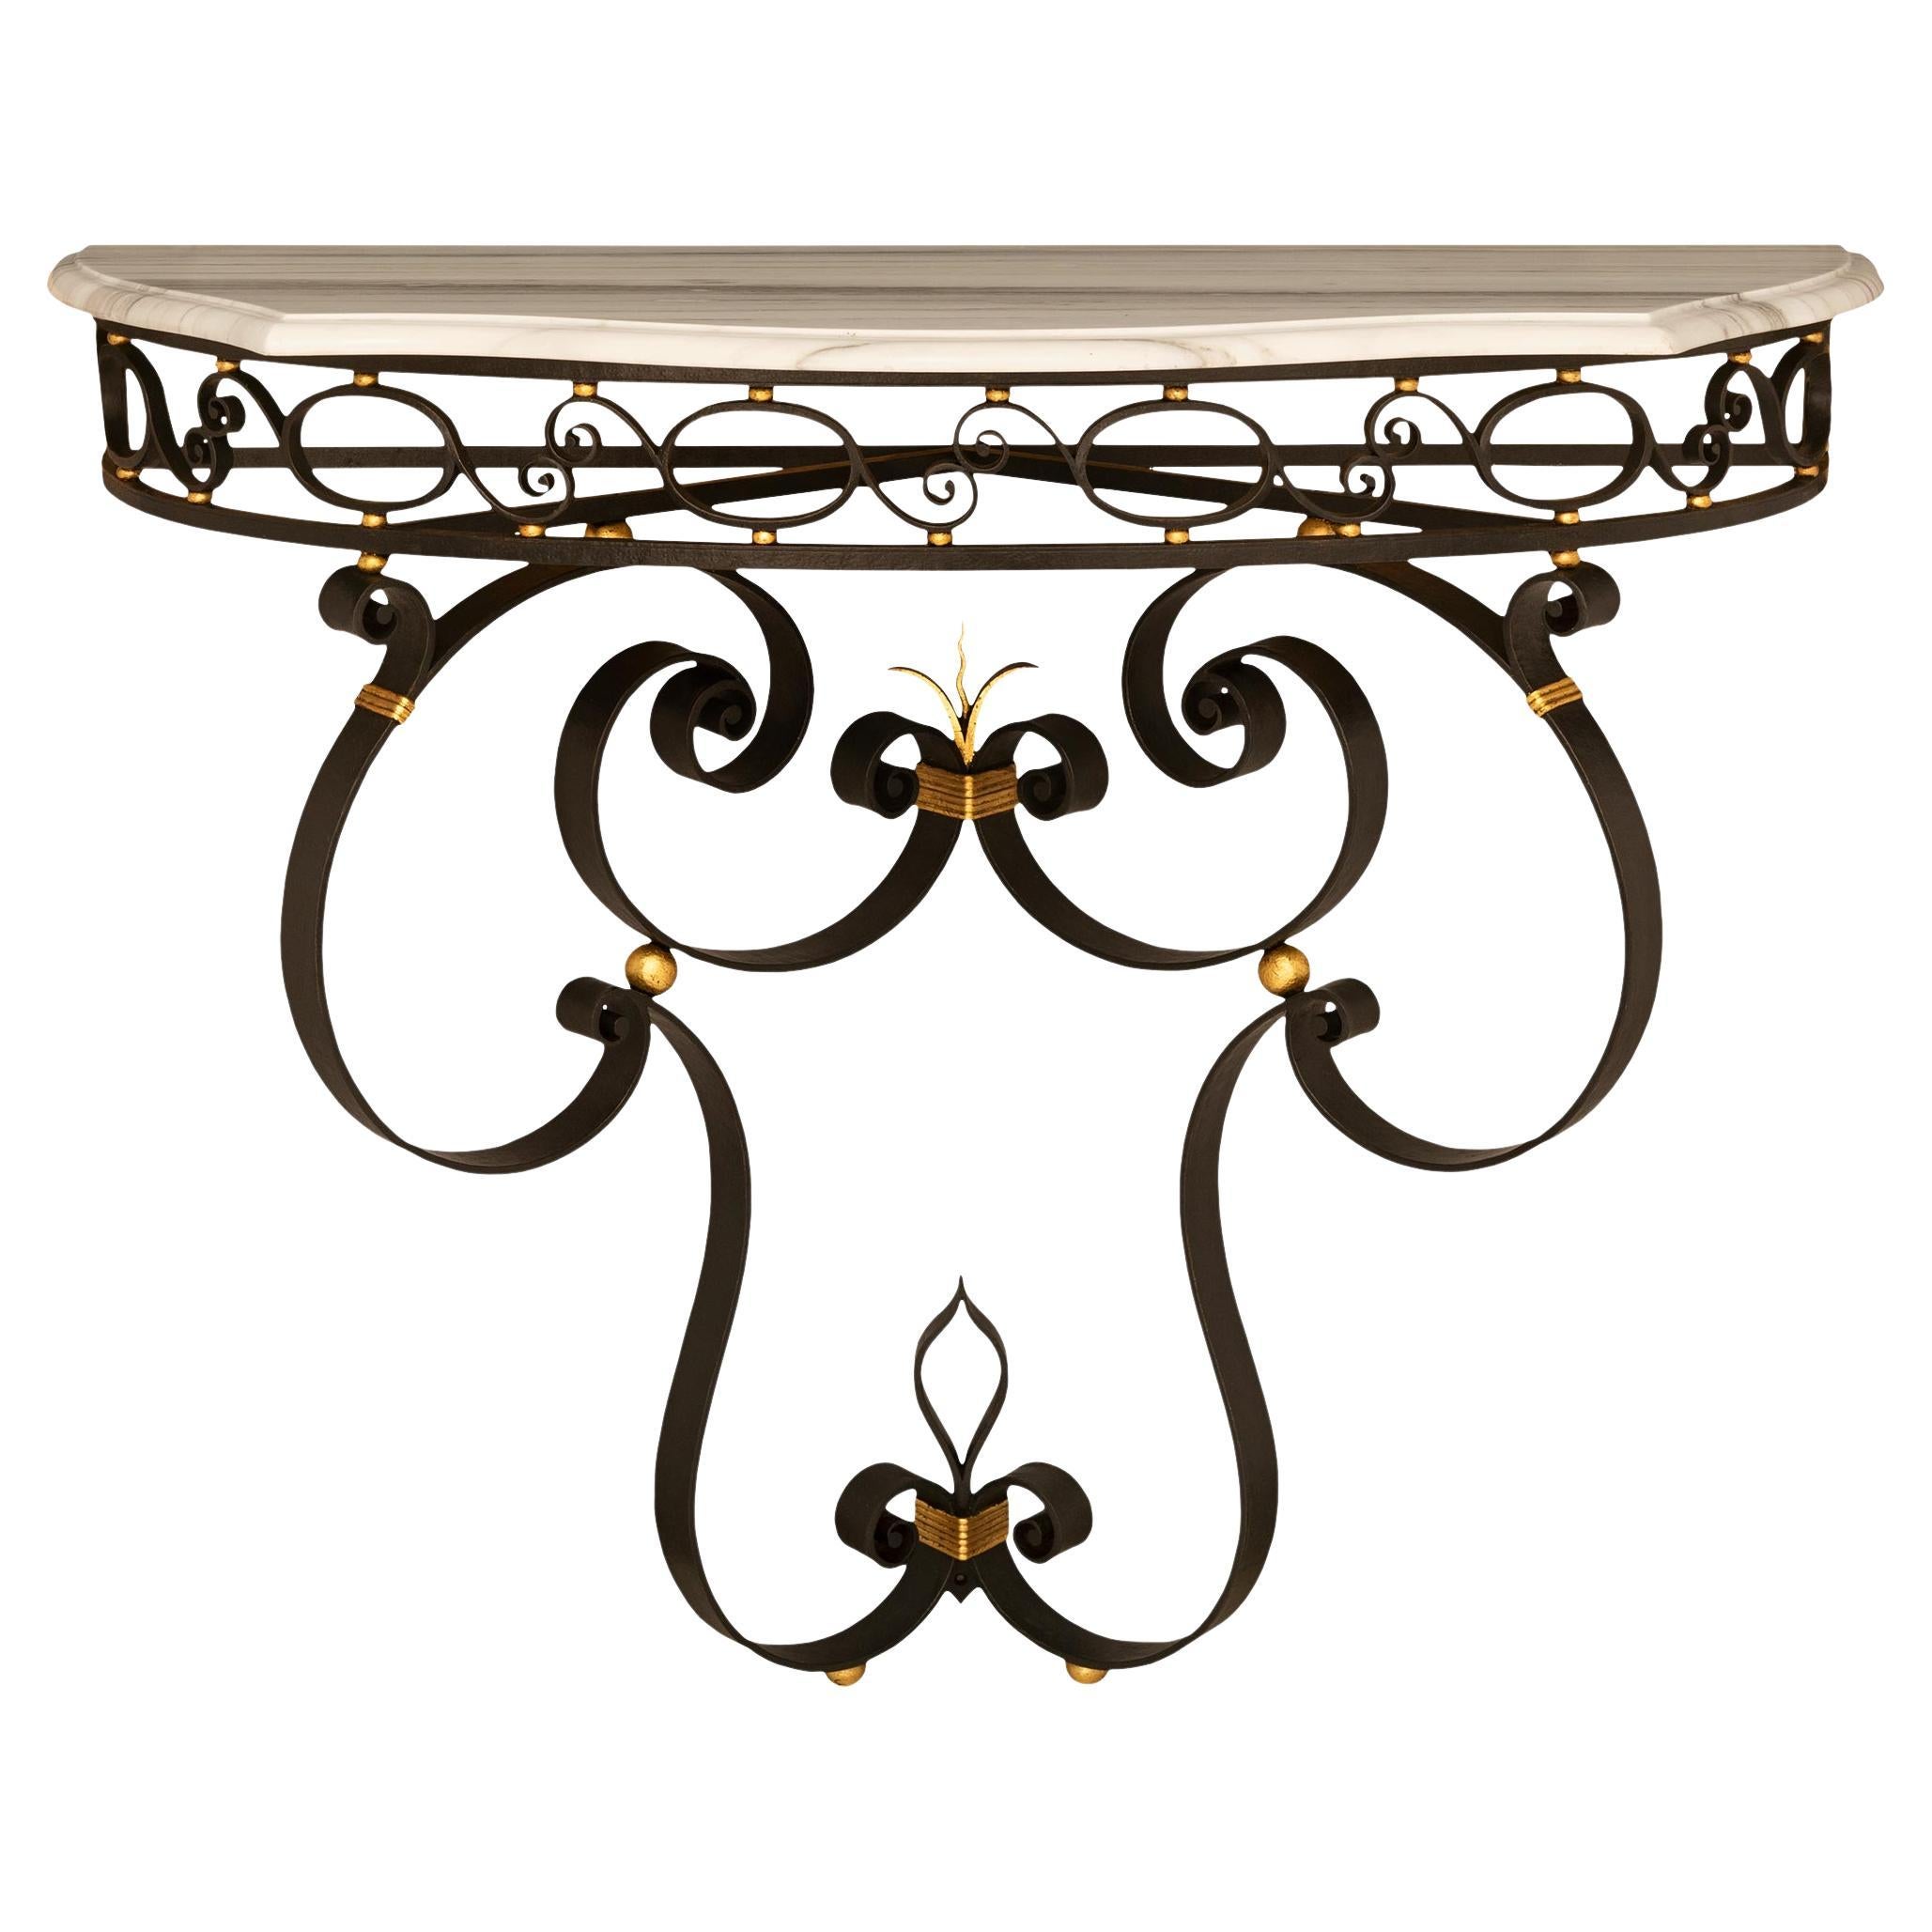 A French turn of the century Wrought Iron, Gilt Metal and marble console